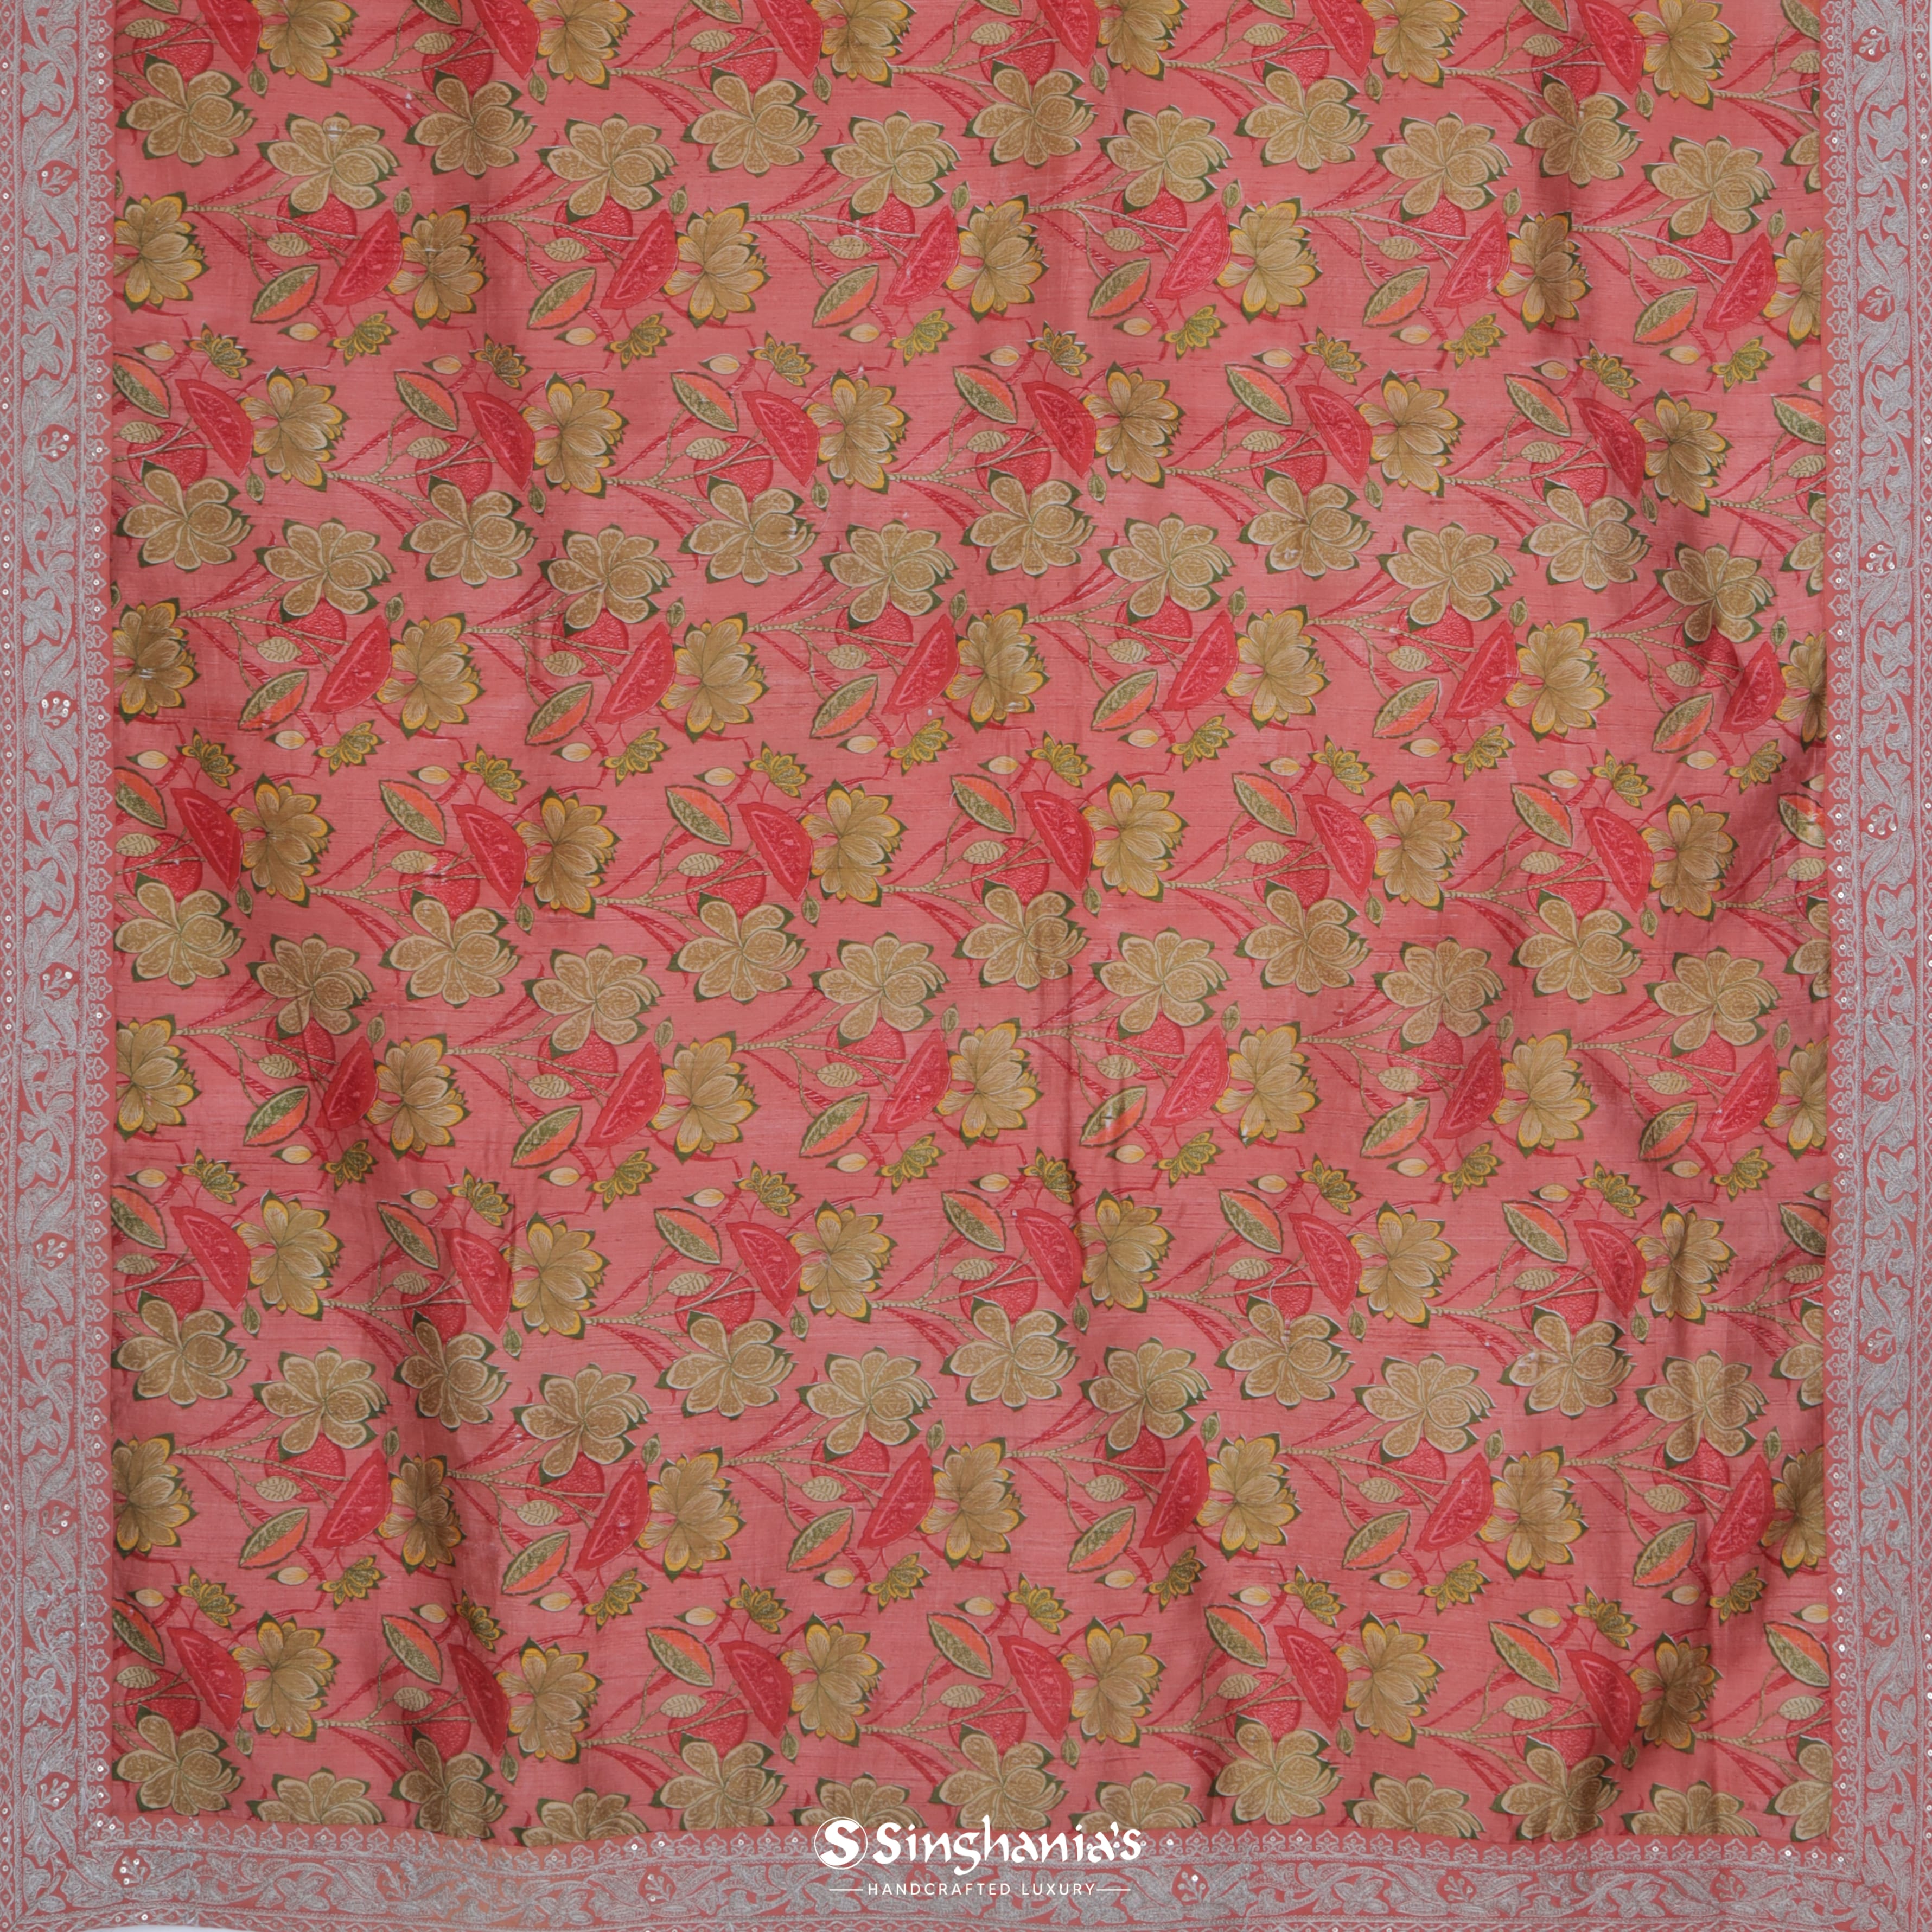 Deep Blush Dupion Printed Saree With Floral Jaal Pattern